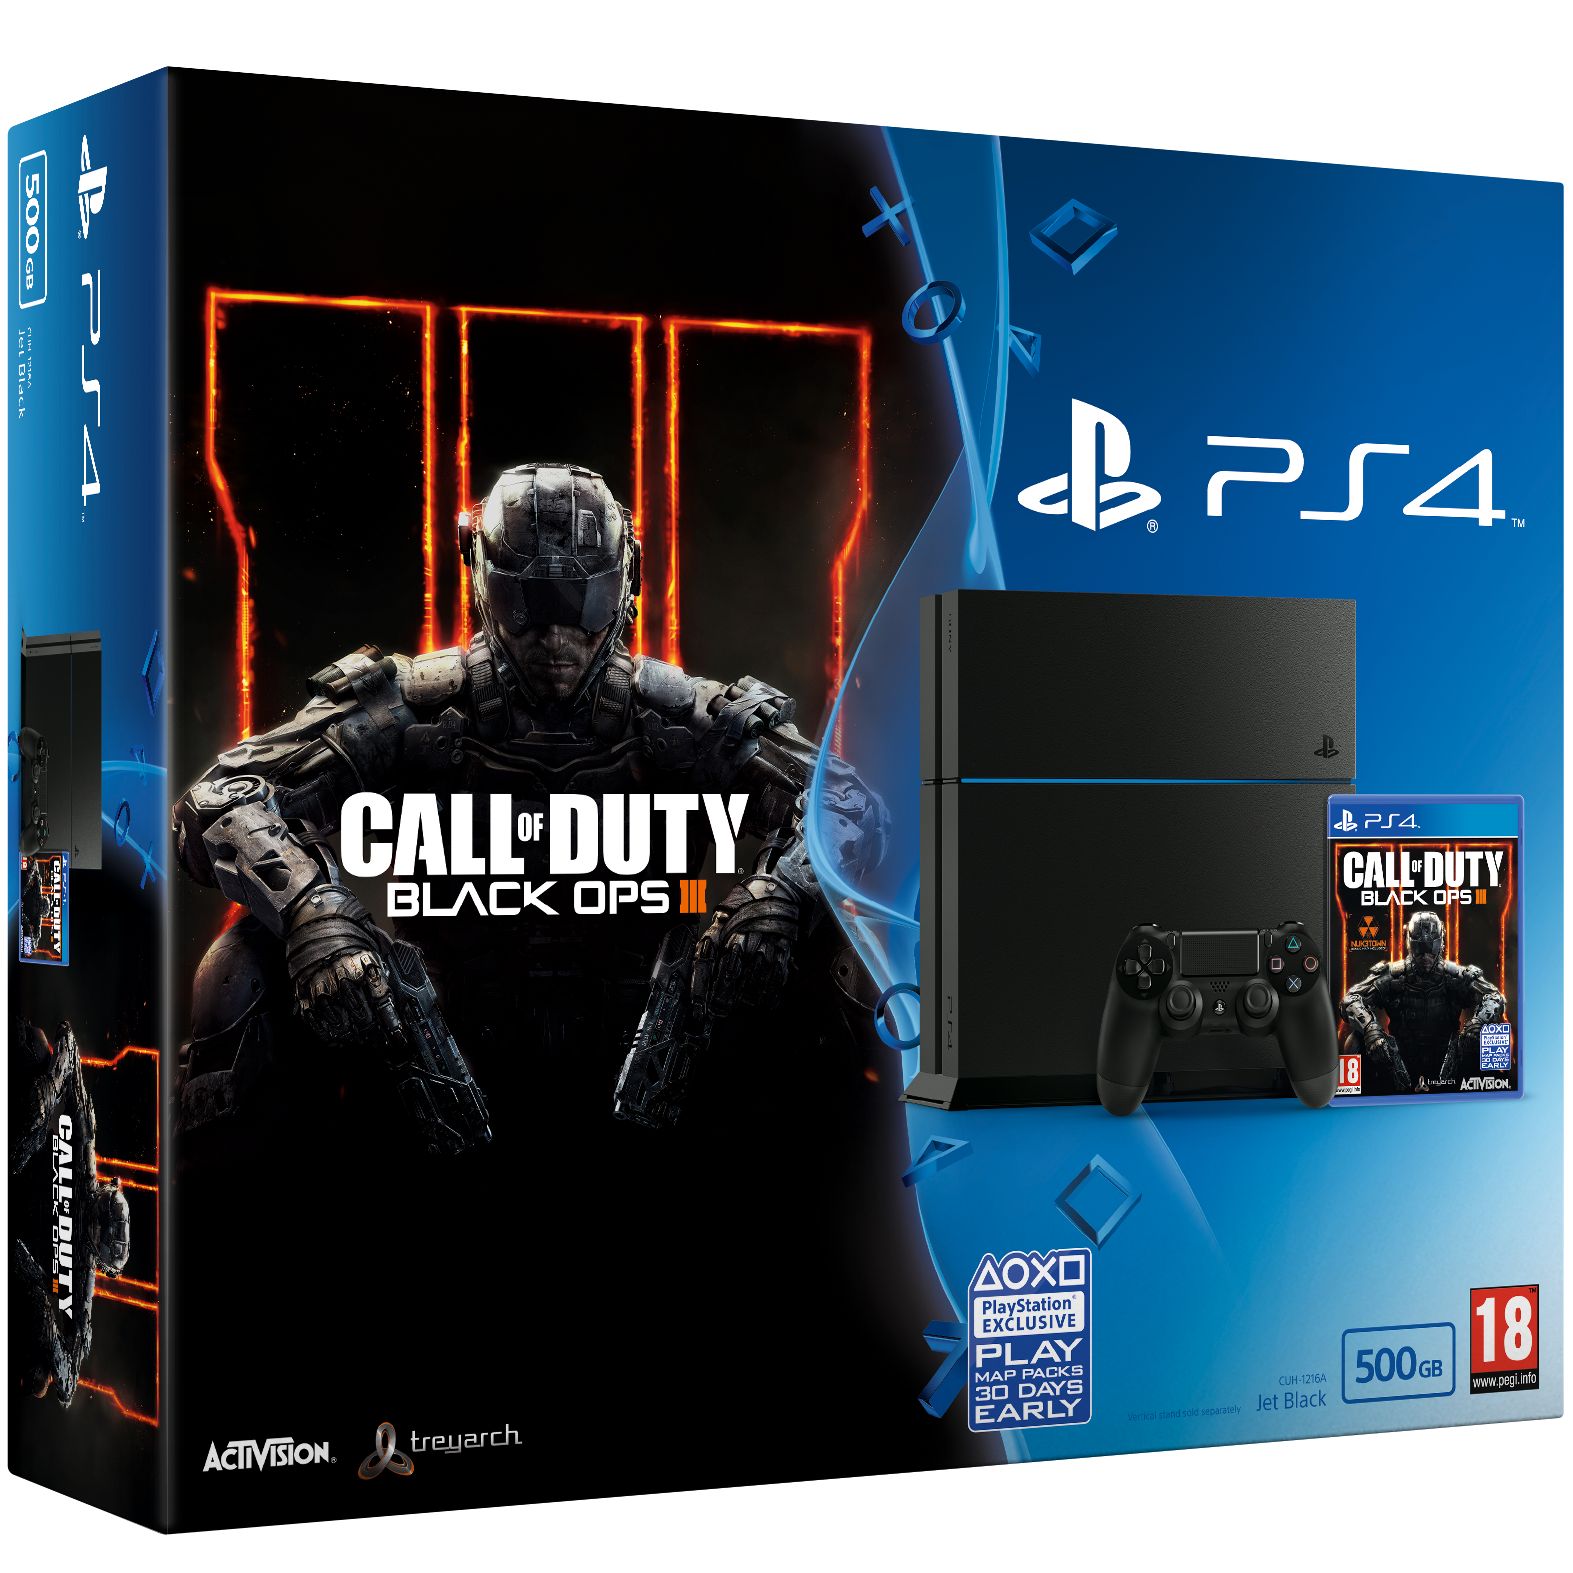 ps4 black ops console